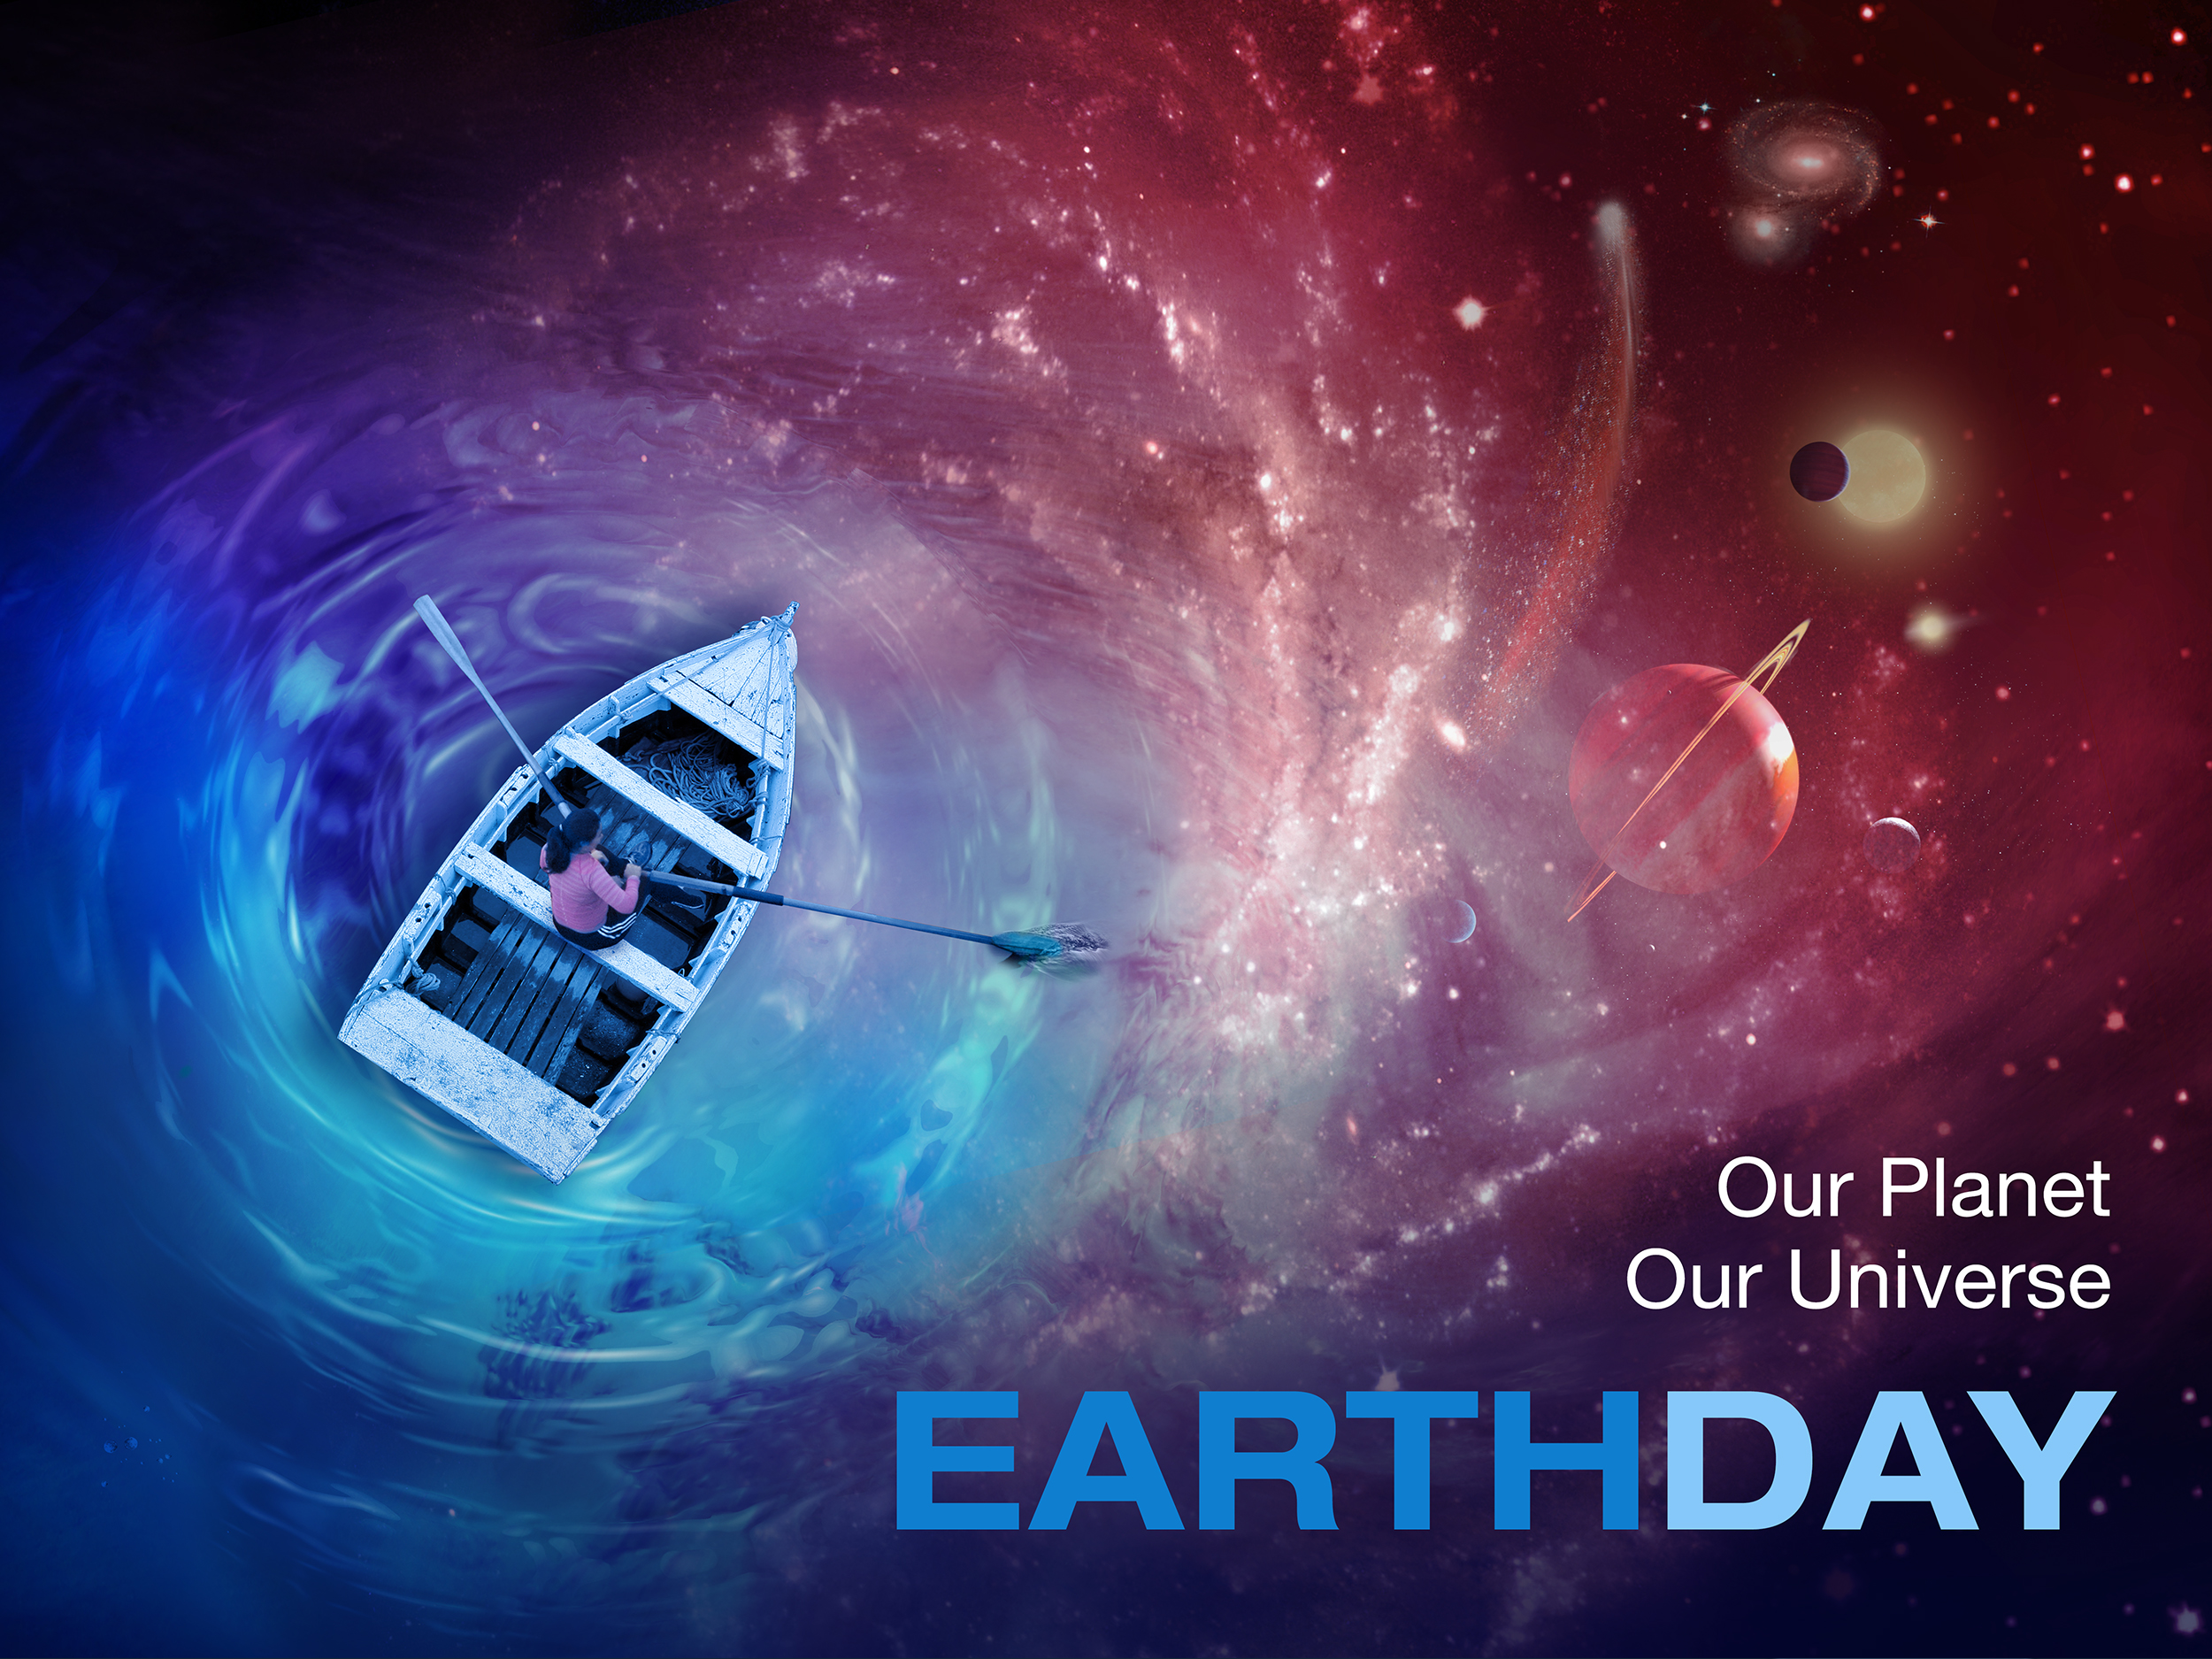 Earth Day 2013 poster